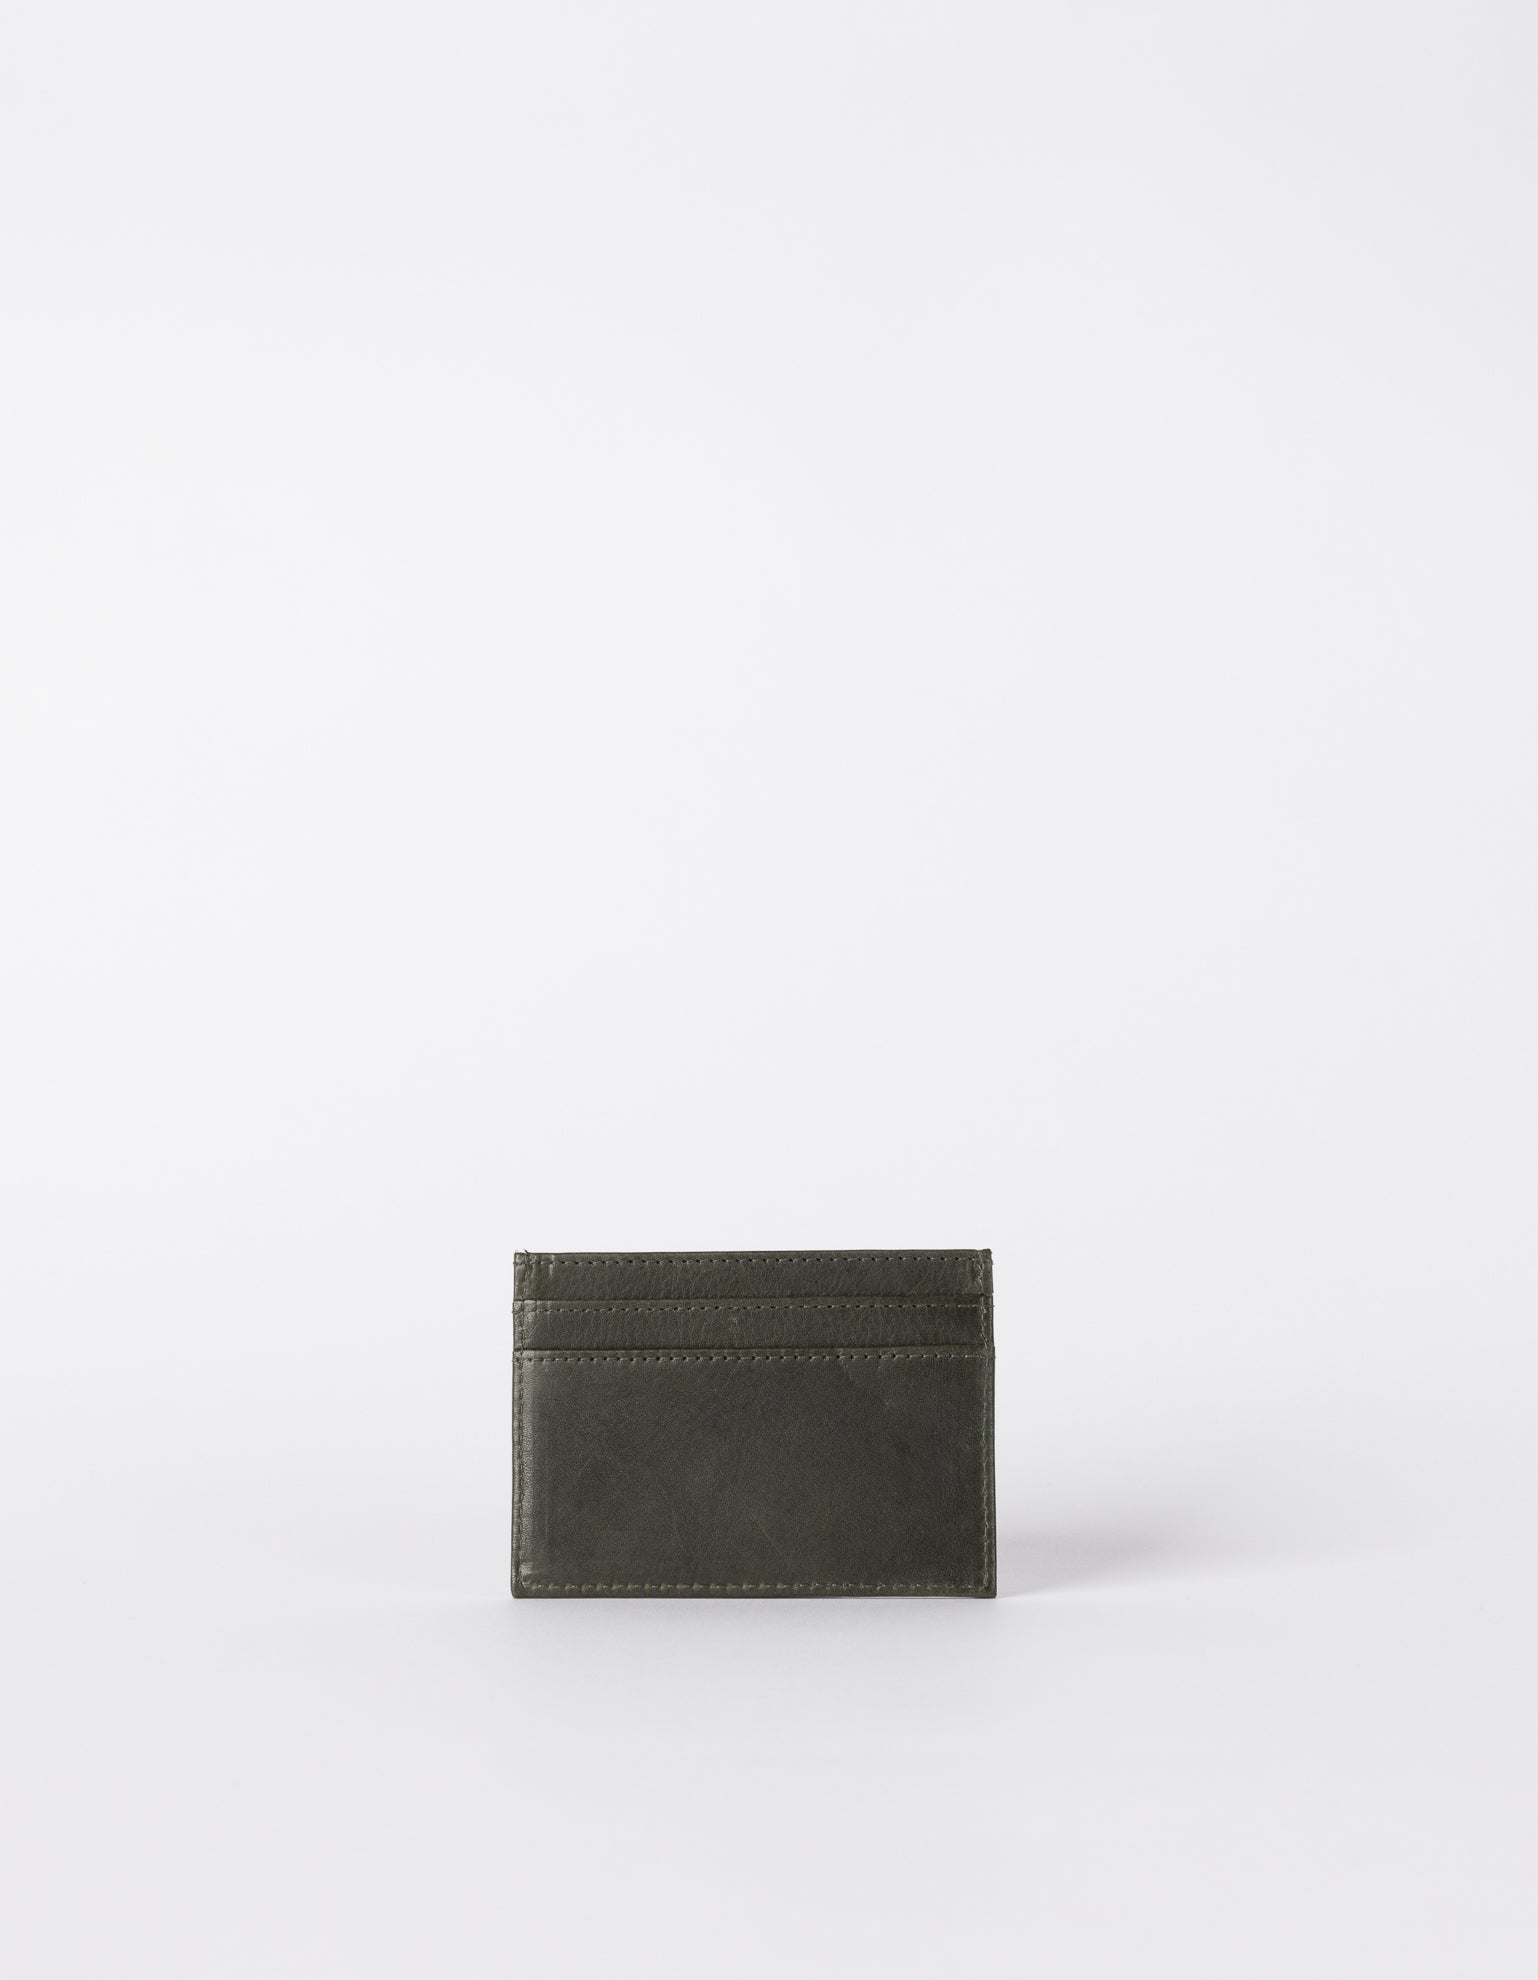 Marks Cardcase Green Soft Grain Leather. Square leather wallet, card case for bank cards. Back product image.